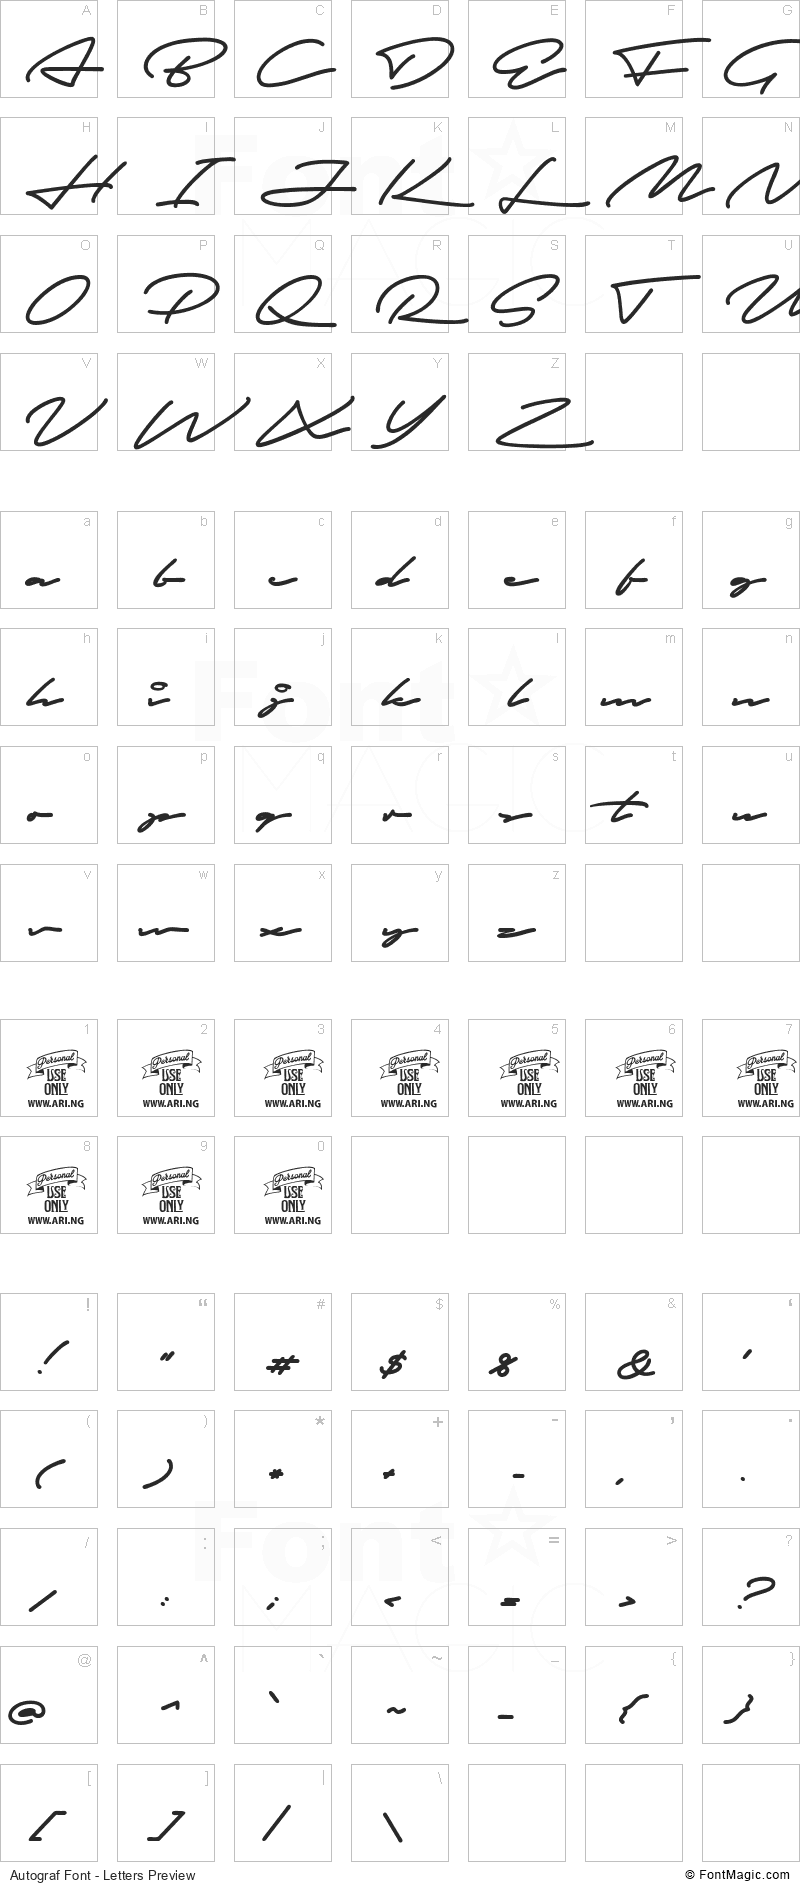 Autograf Font - All Latters Preview Chart